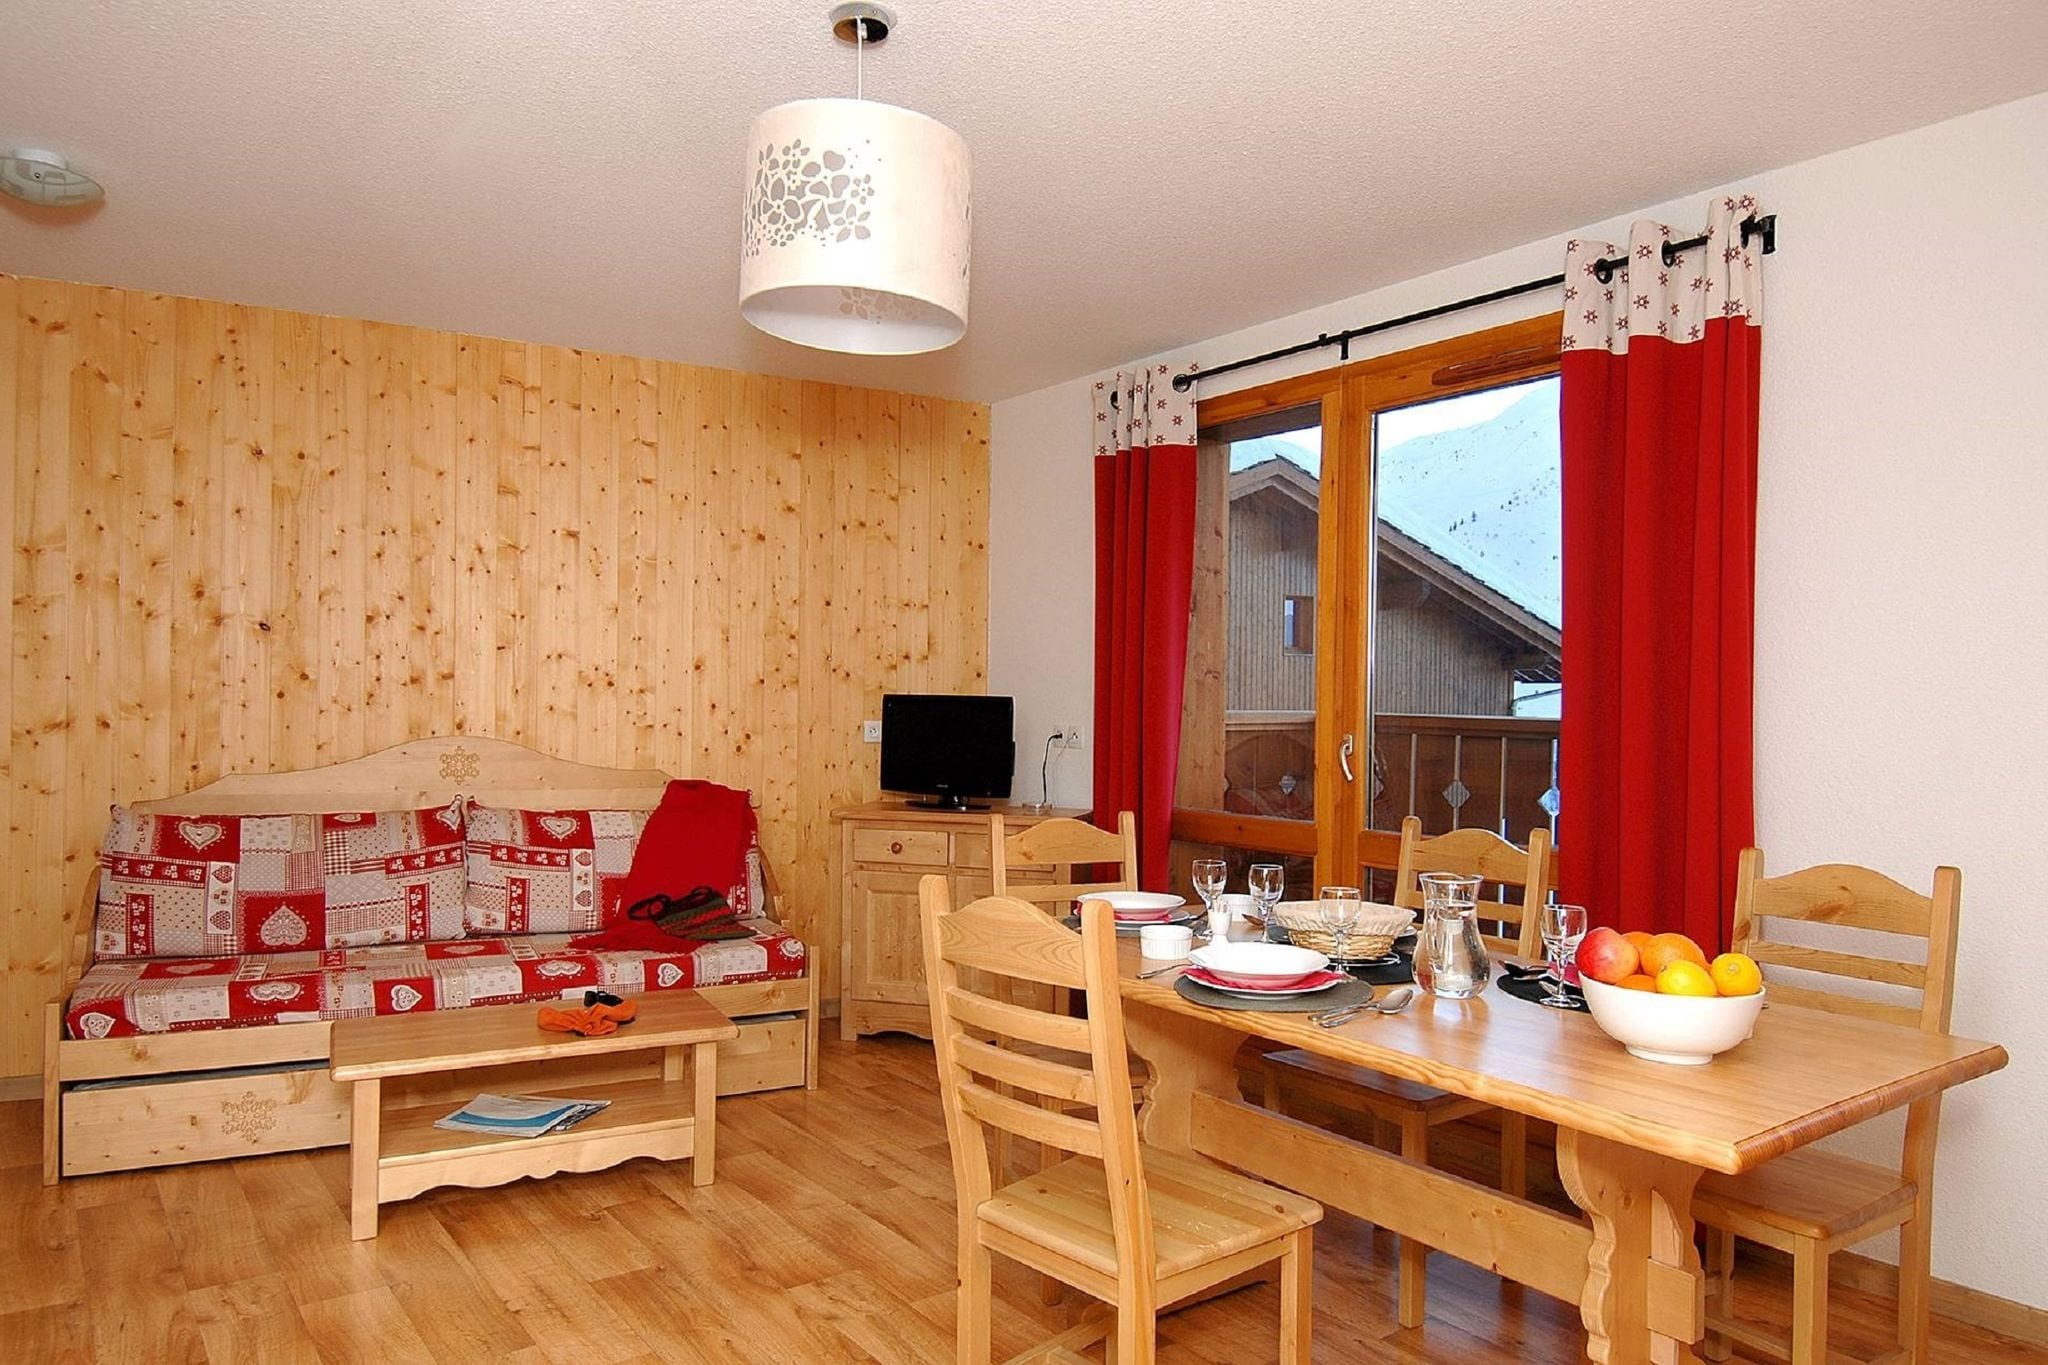 Rustic apartment with dishwasher, located in Valmeinie